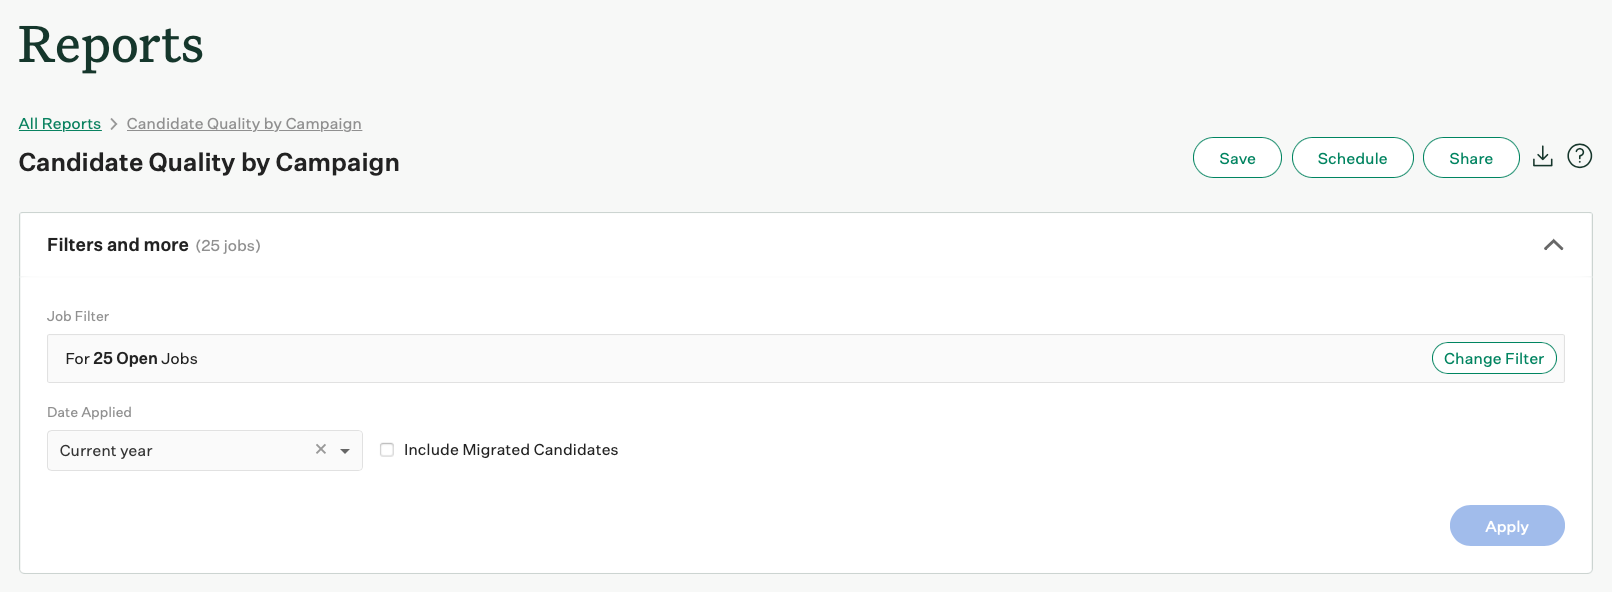 Screenshot of Filters and more on a candidate quality by campaign report